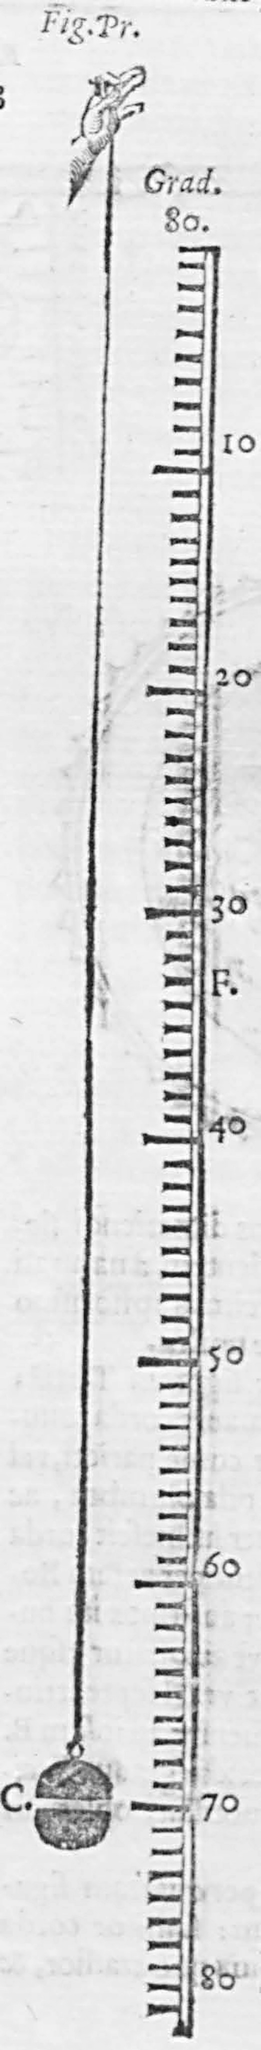 An illustration appears on a cut-out from a page in a book. It has a long vertical scale with values from 10 to 80, graduated in divisions of 10. A thread appears parallel to the scale with a lead ball C, attached to its bottom end. The label F appears between values 30 and 40.